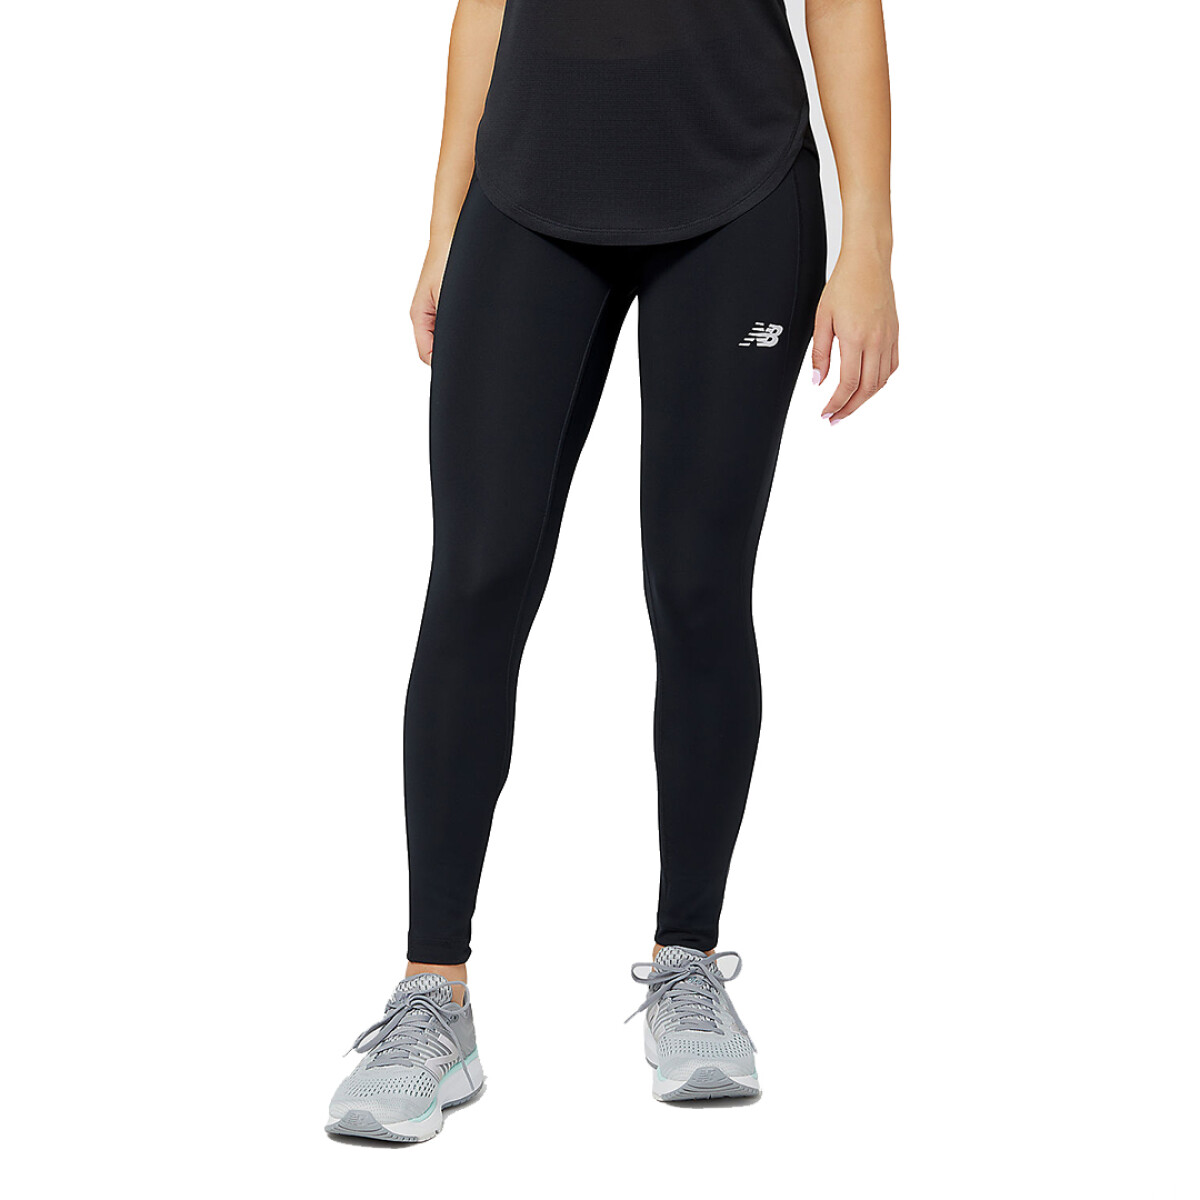 ACCELERATE TIGHT - NEW BALANCE 